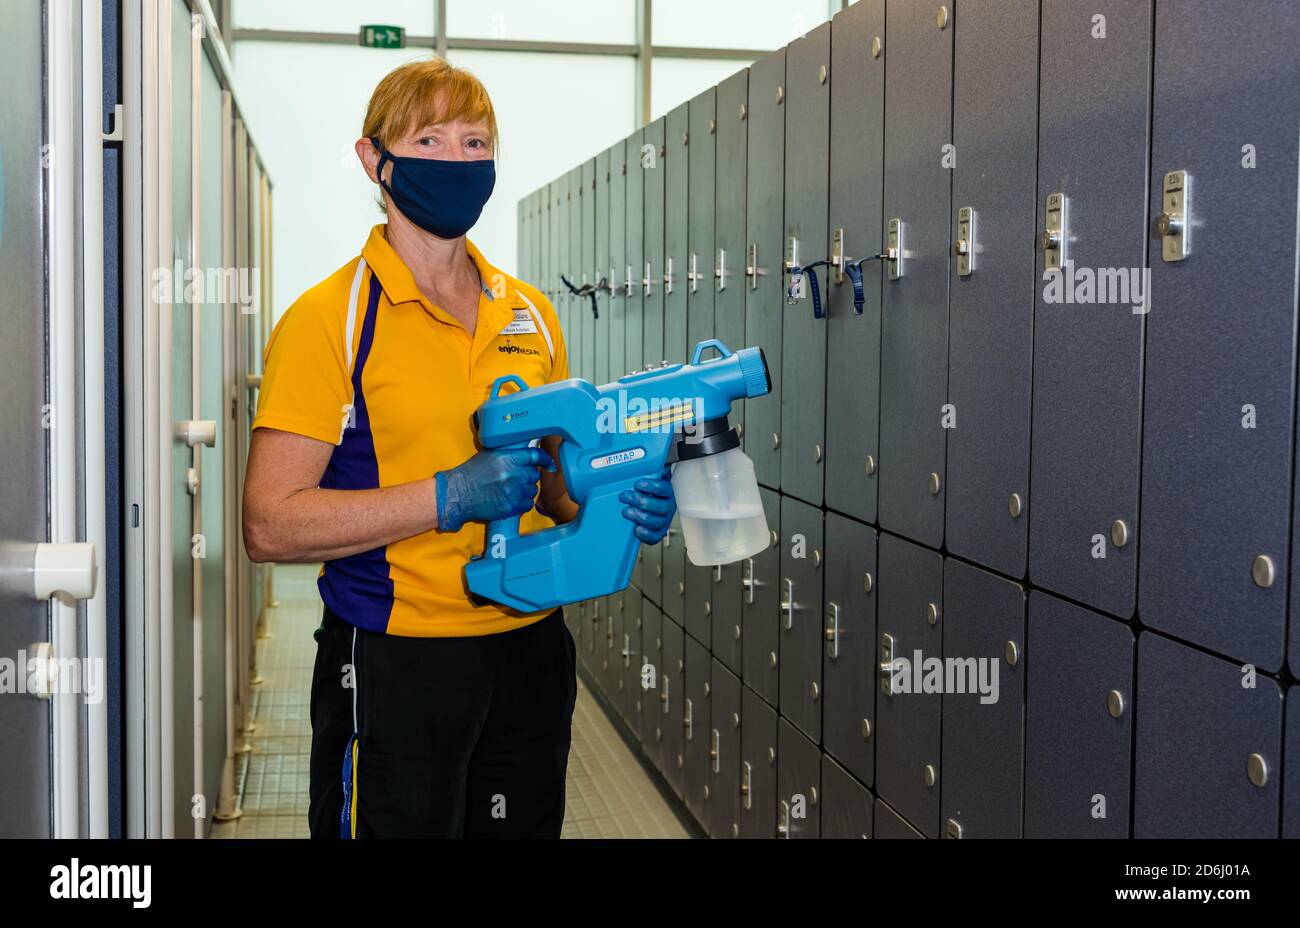 Female staff wearing face mask cleaning lockers with fogger hygiene sprayer in Covid-19 pandemic, North Berwick sports centre, East Lothian, Scotland Stock Photo